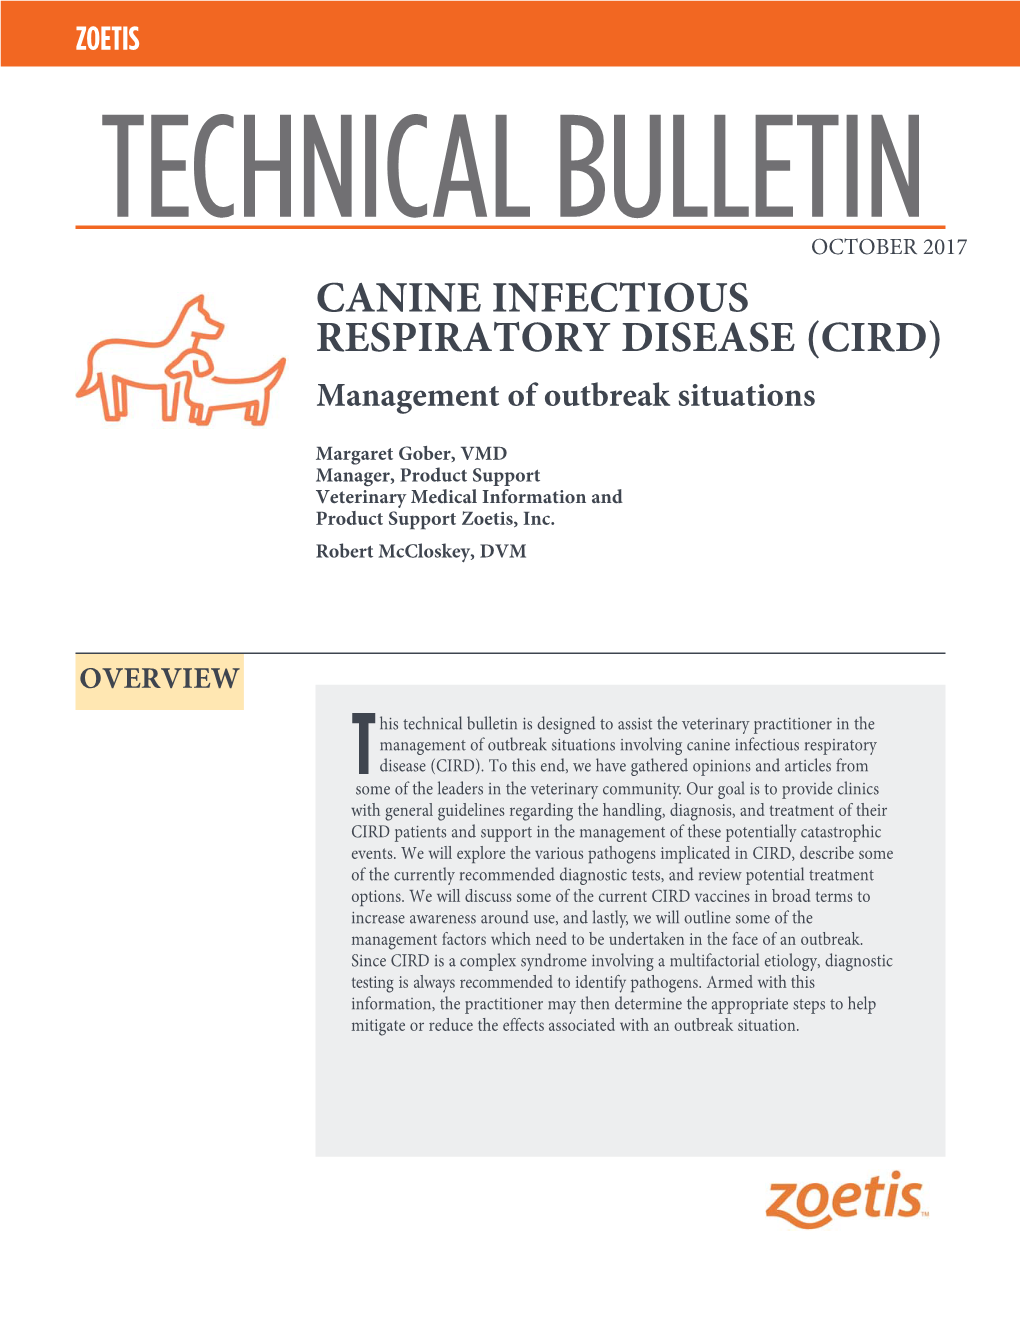 CANINE INFECTIOUS RESPIRATORY DISEASE (CIRD) Management of Outbreak Situations